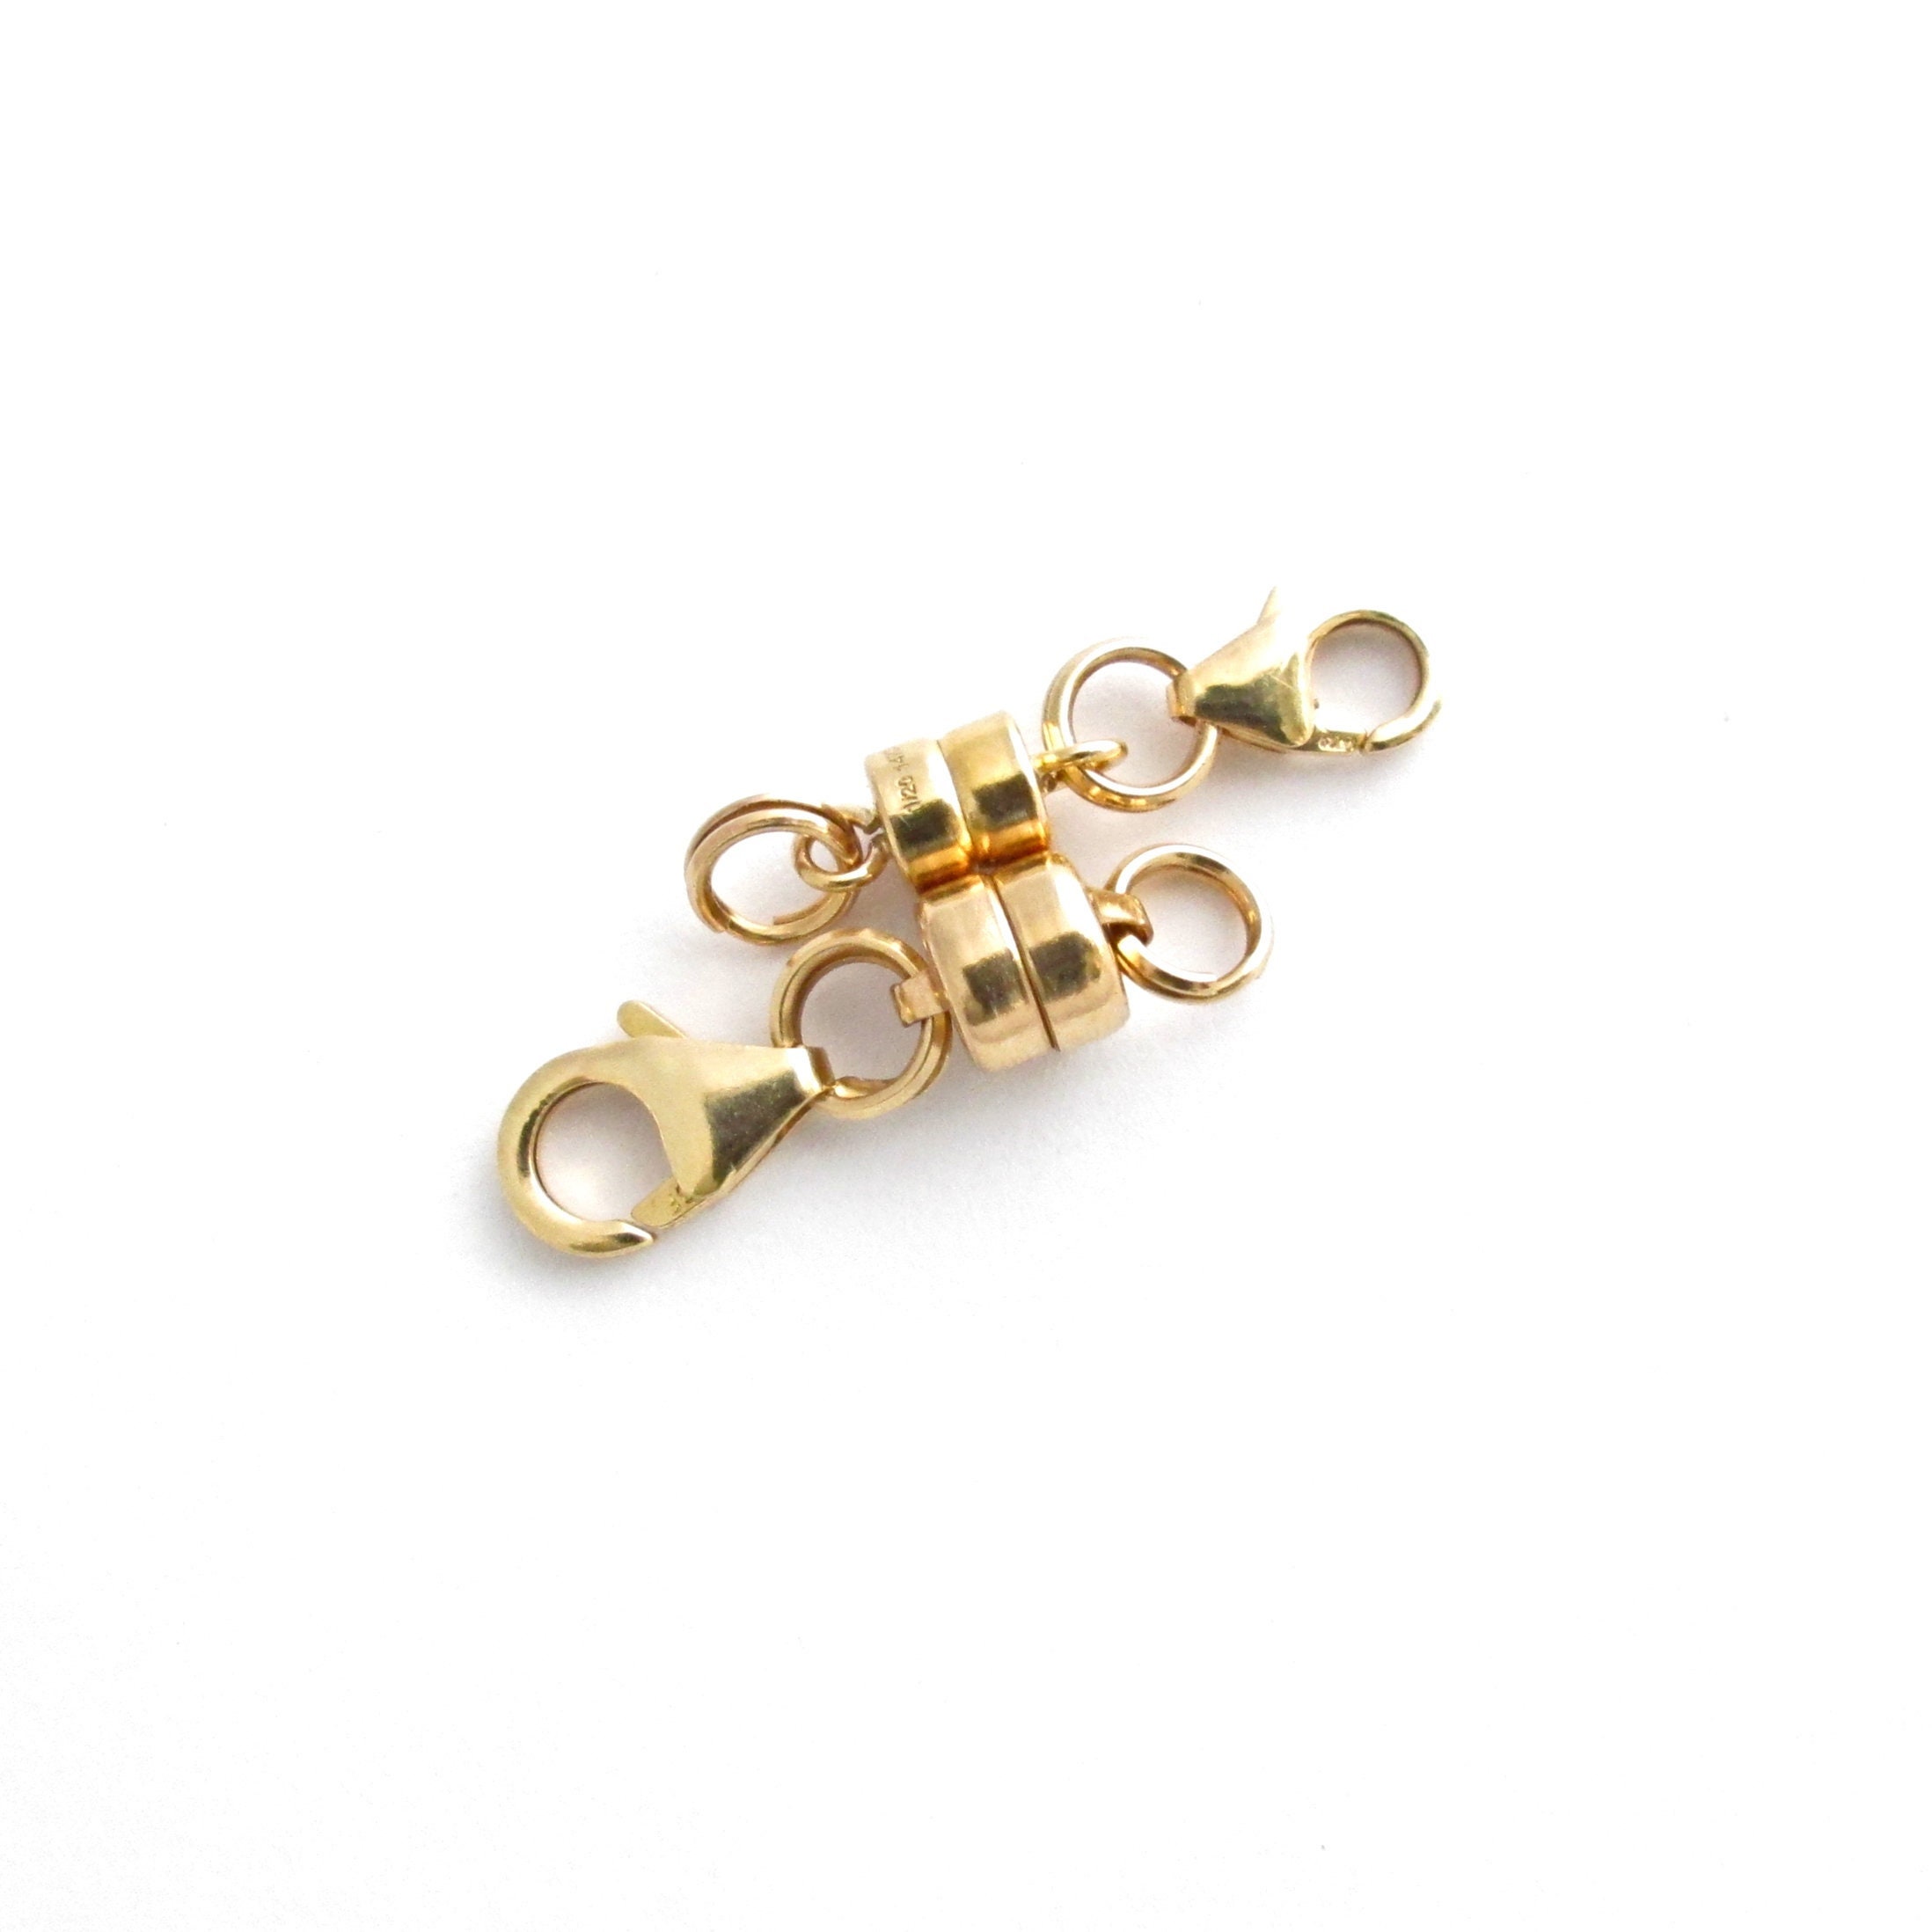 uGems Magnetic Clasp 4.5mm Gold Filled Converter for Necklaces Closed